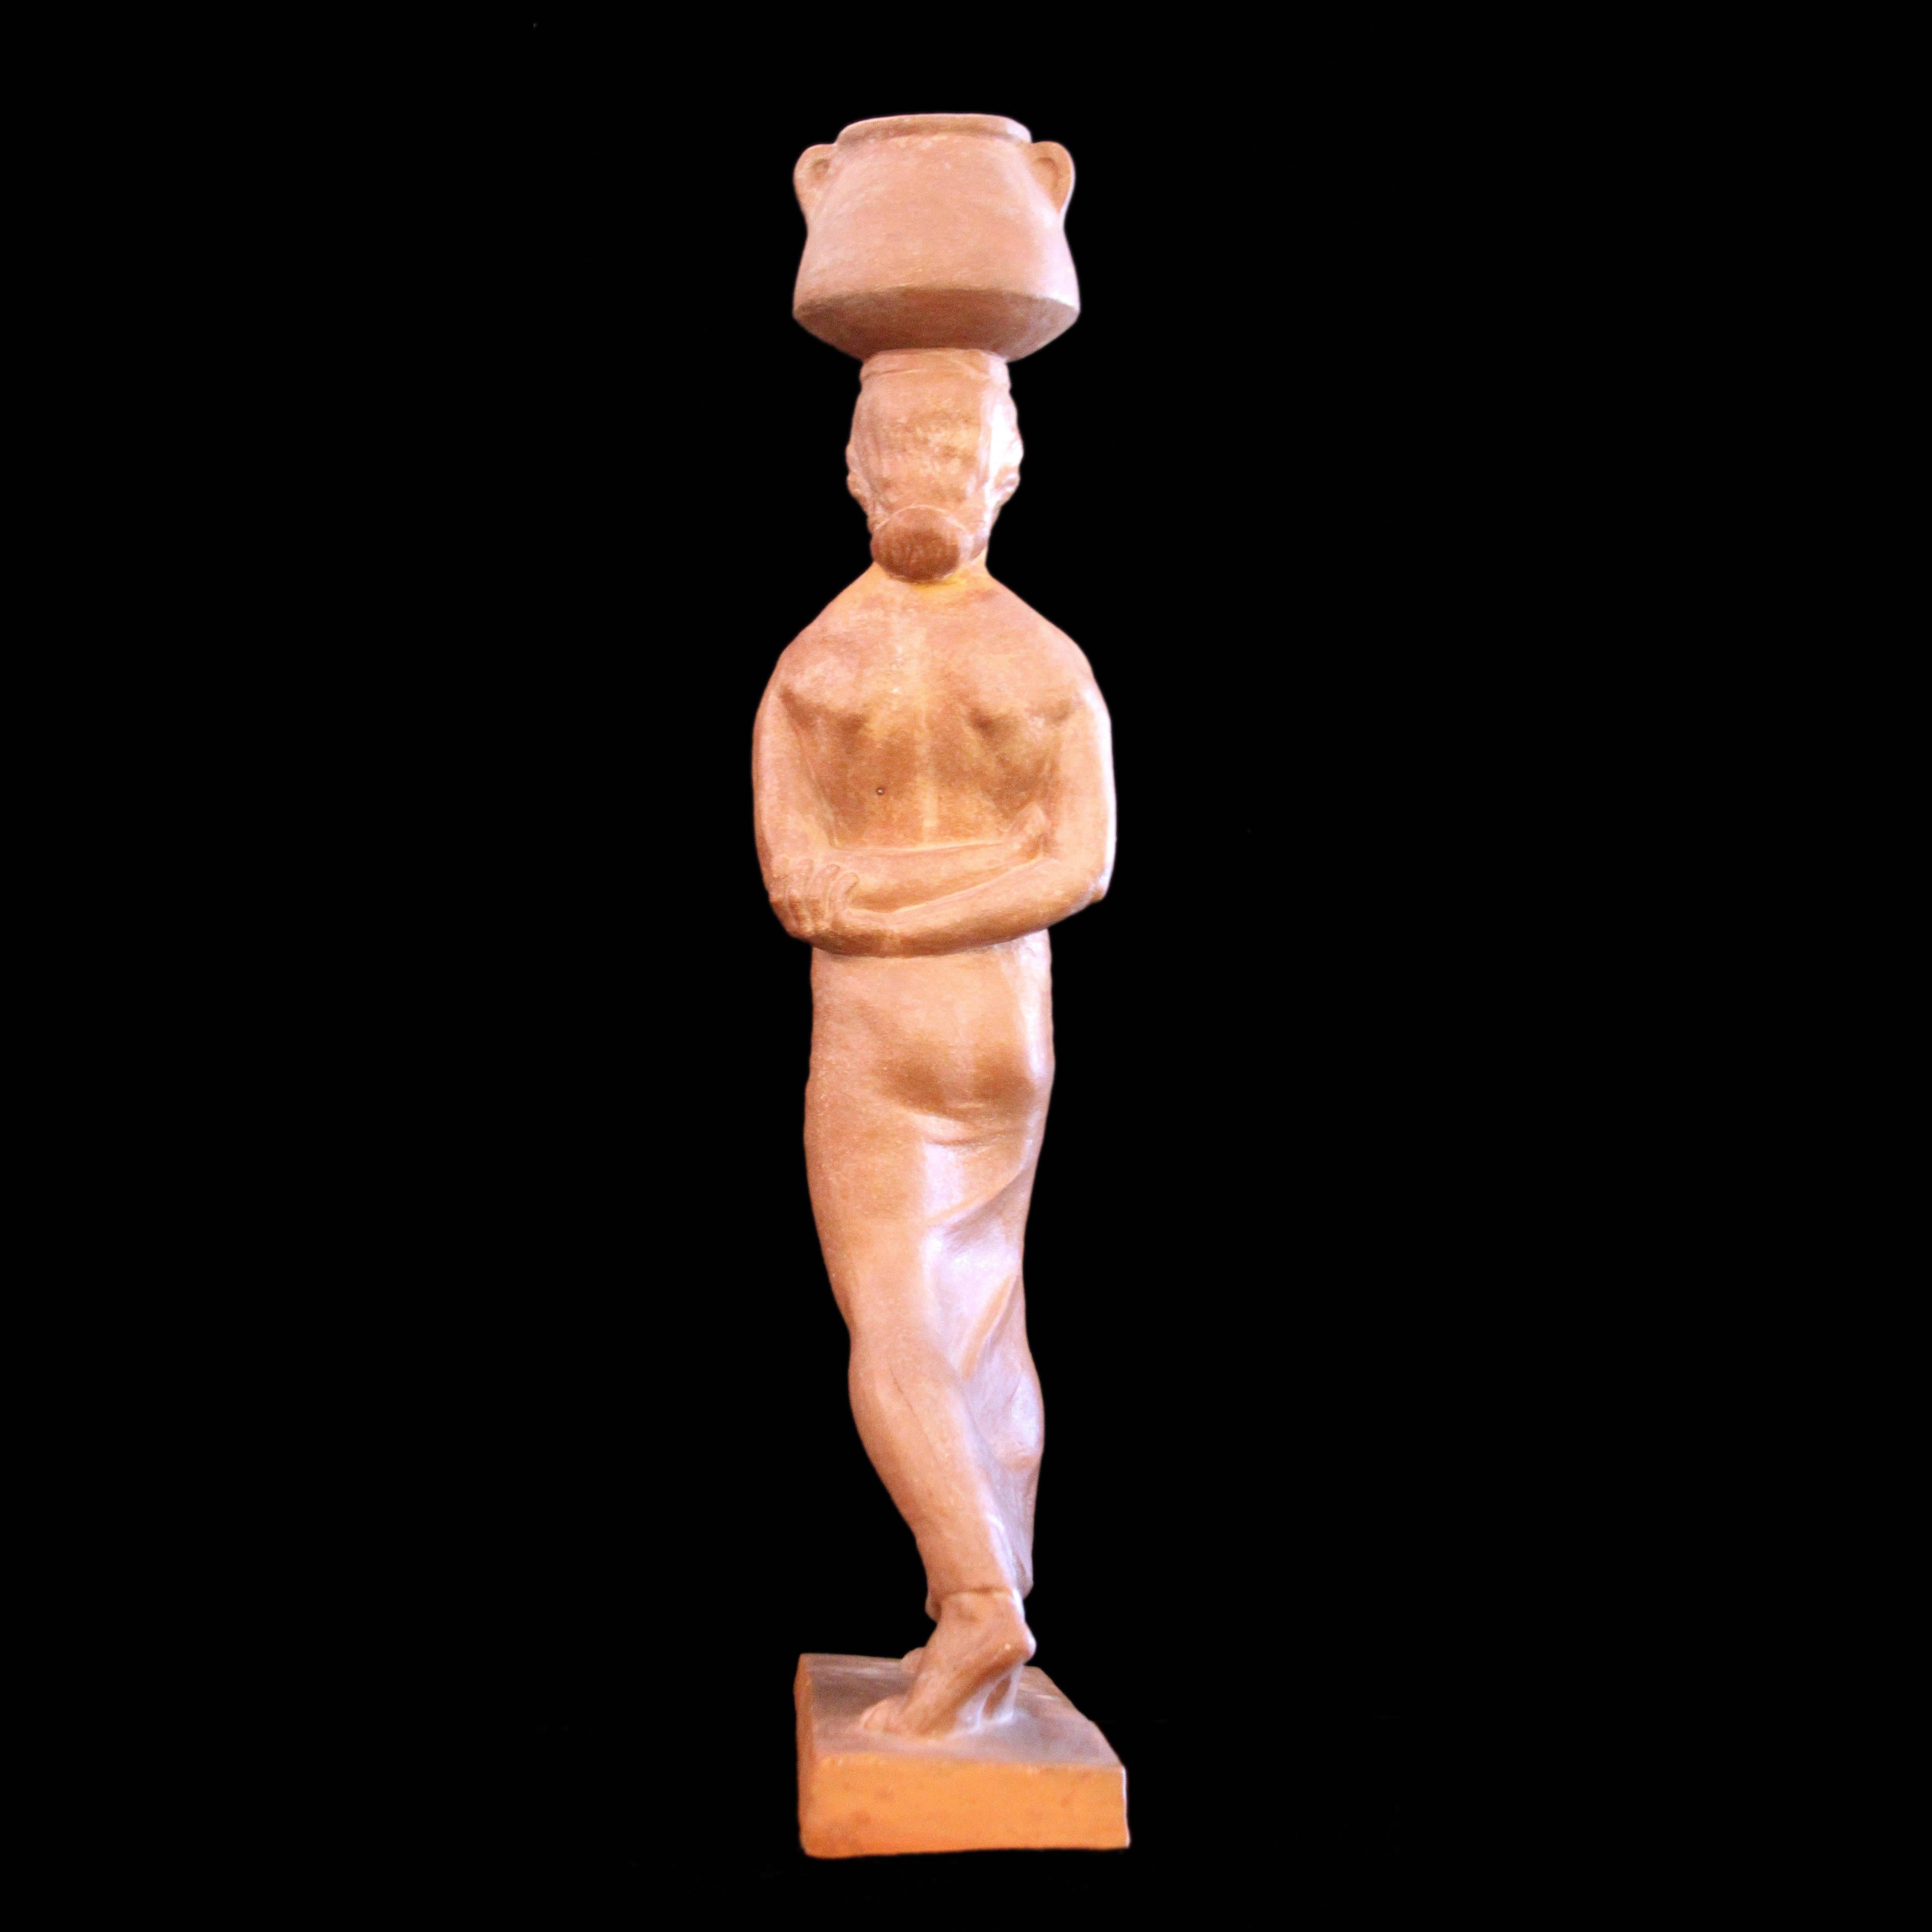 Our Gallery presents sculptures by Bernhard D. Sopher, a major sculptor of the mid-20th century. During Sopher's short time in the United States, he became a well known and respected  who constructed works in all types of sculptural medium from